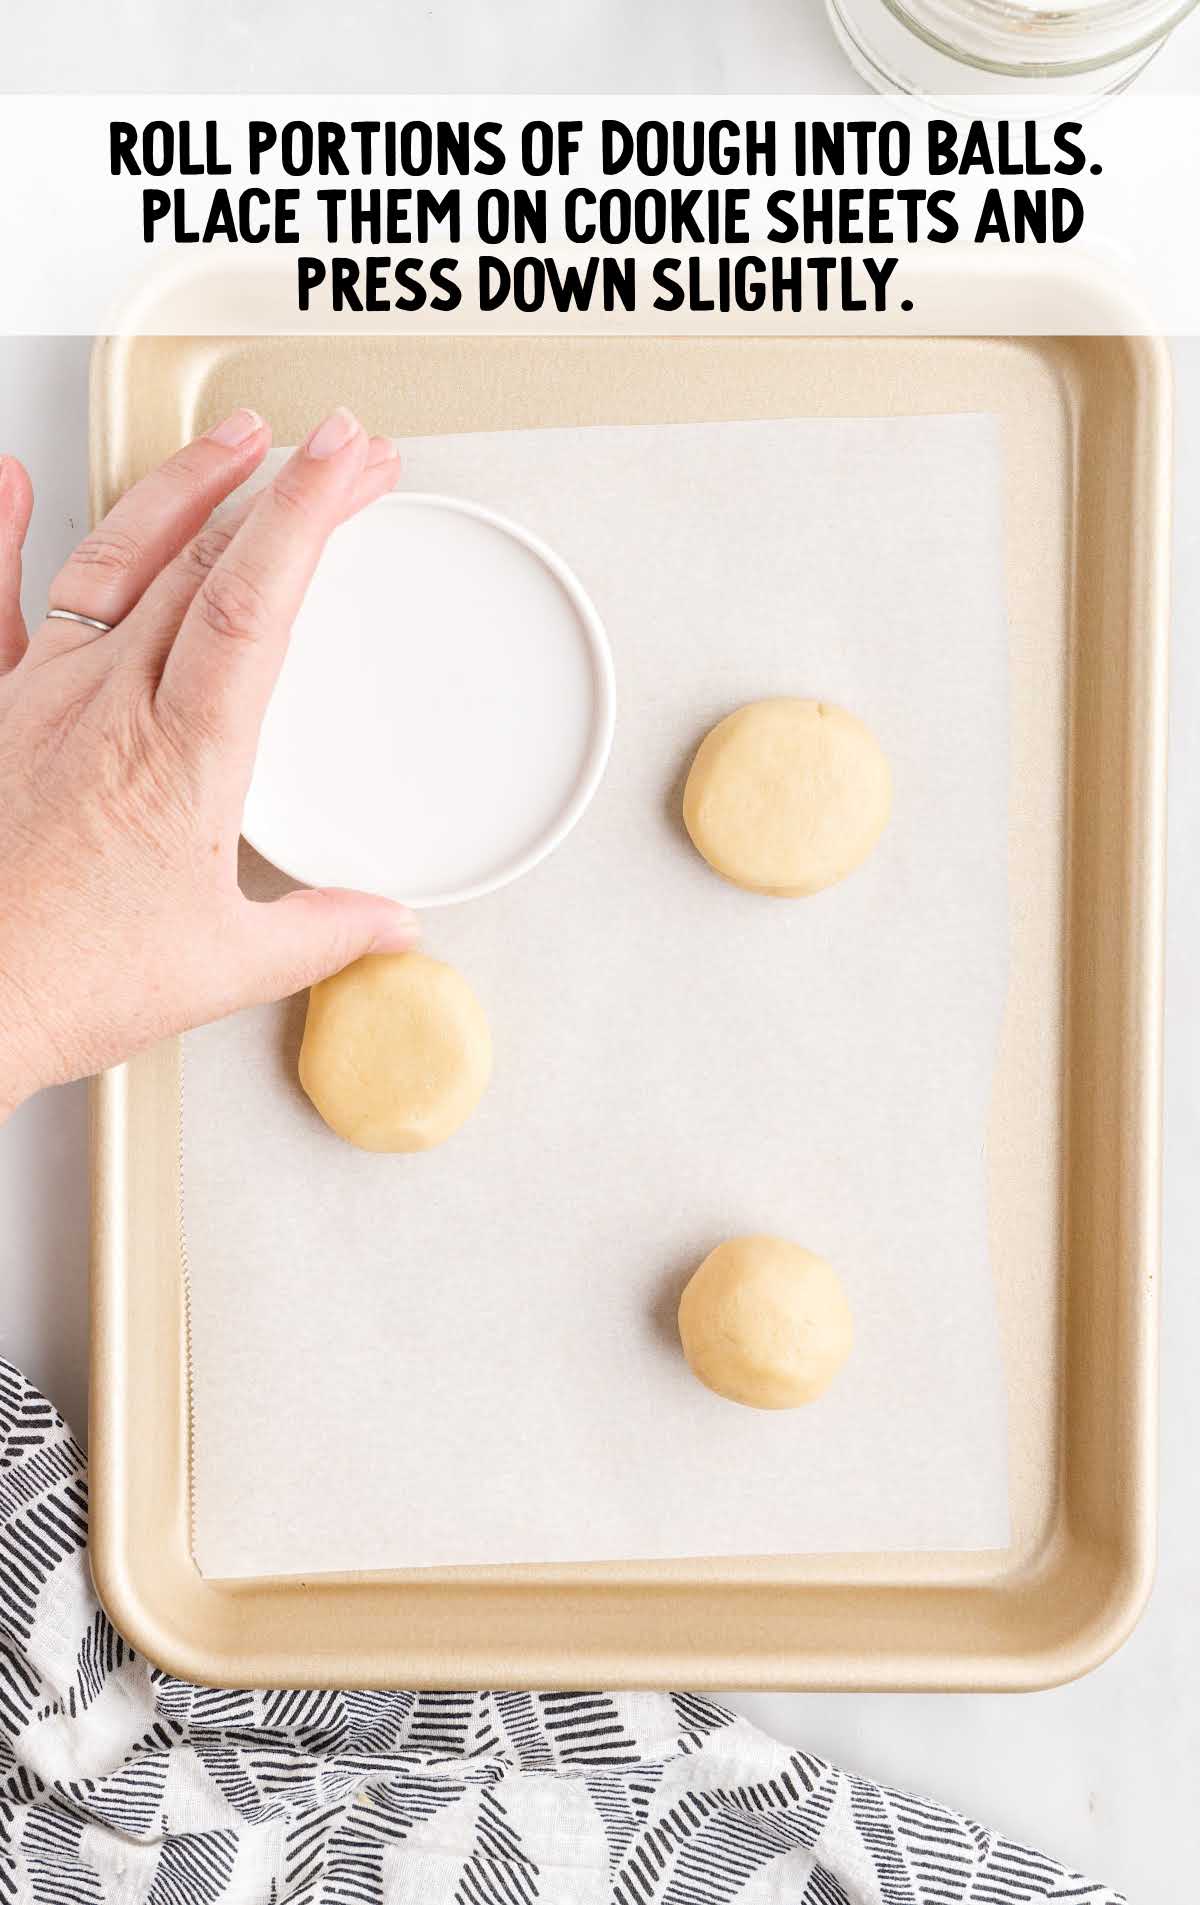 press dough ball slightly into the cookie sheet